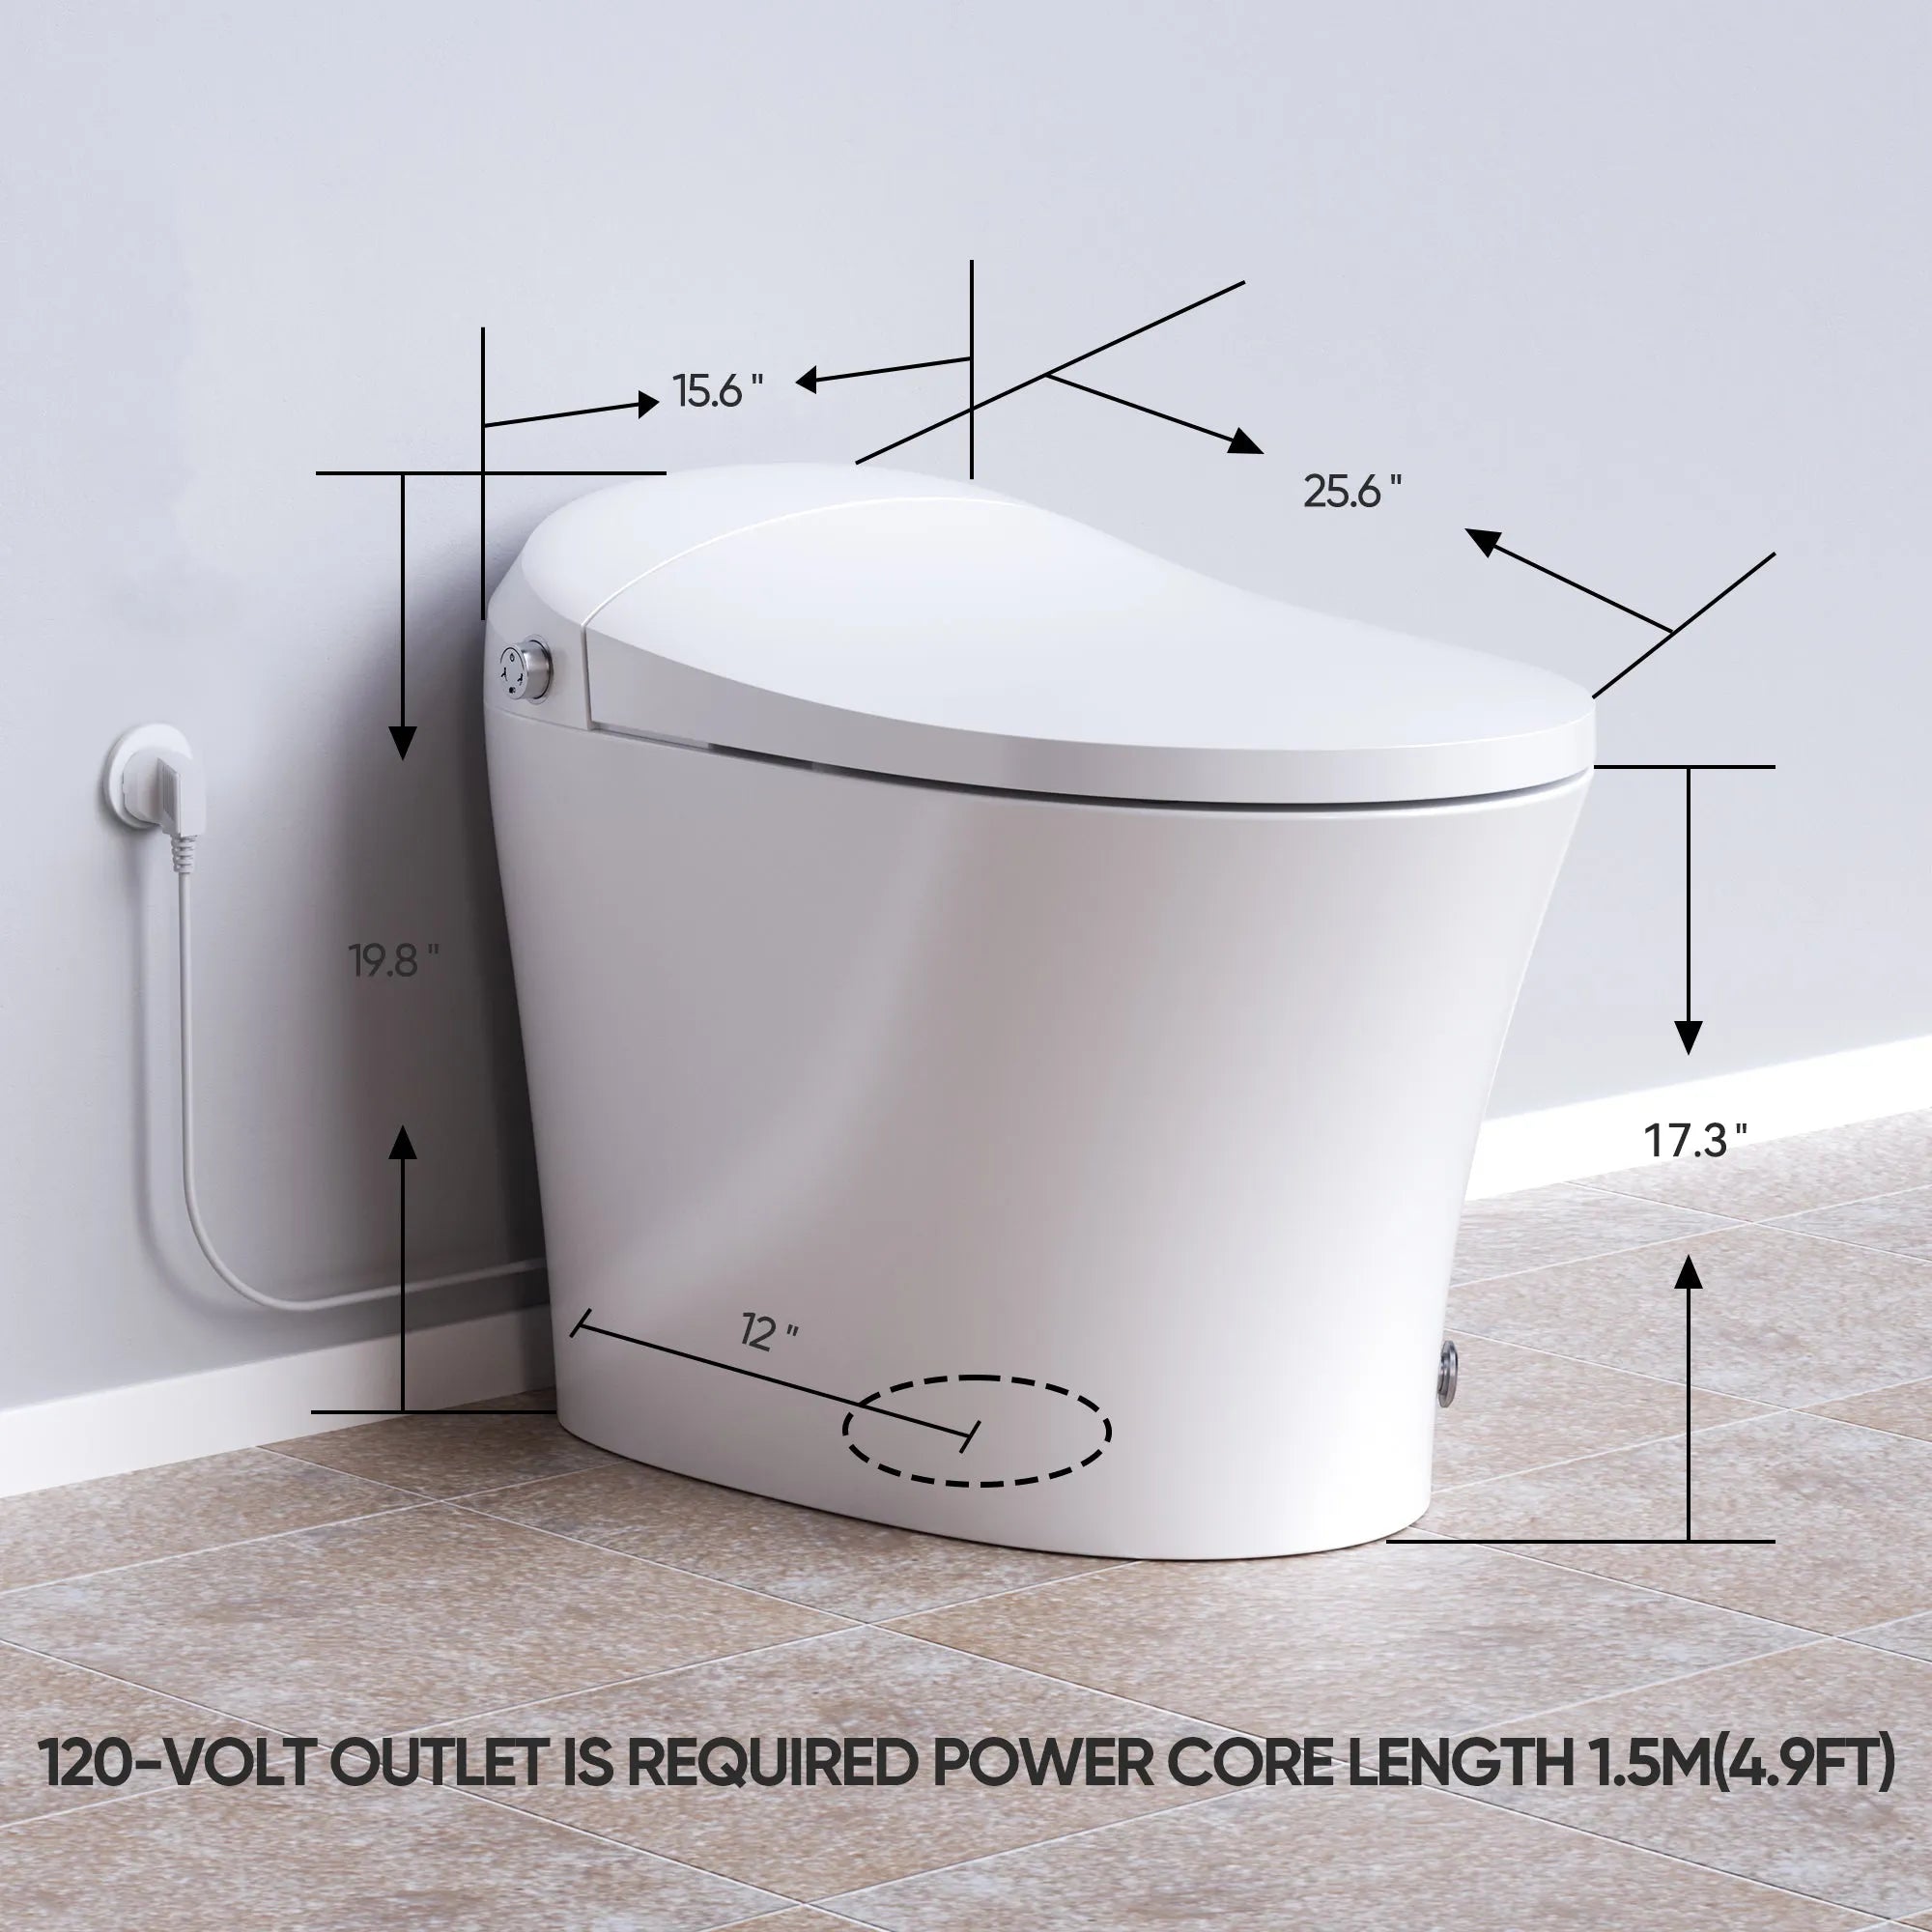 HOROW Modern Bidet Toilet With Heated and ADA Model T15A